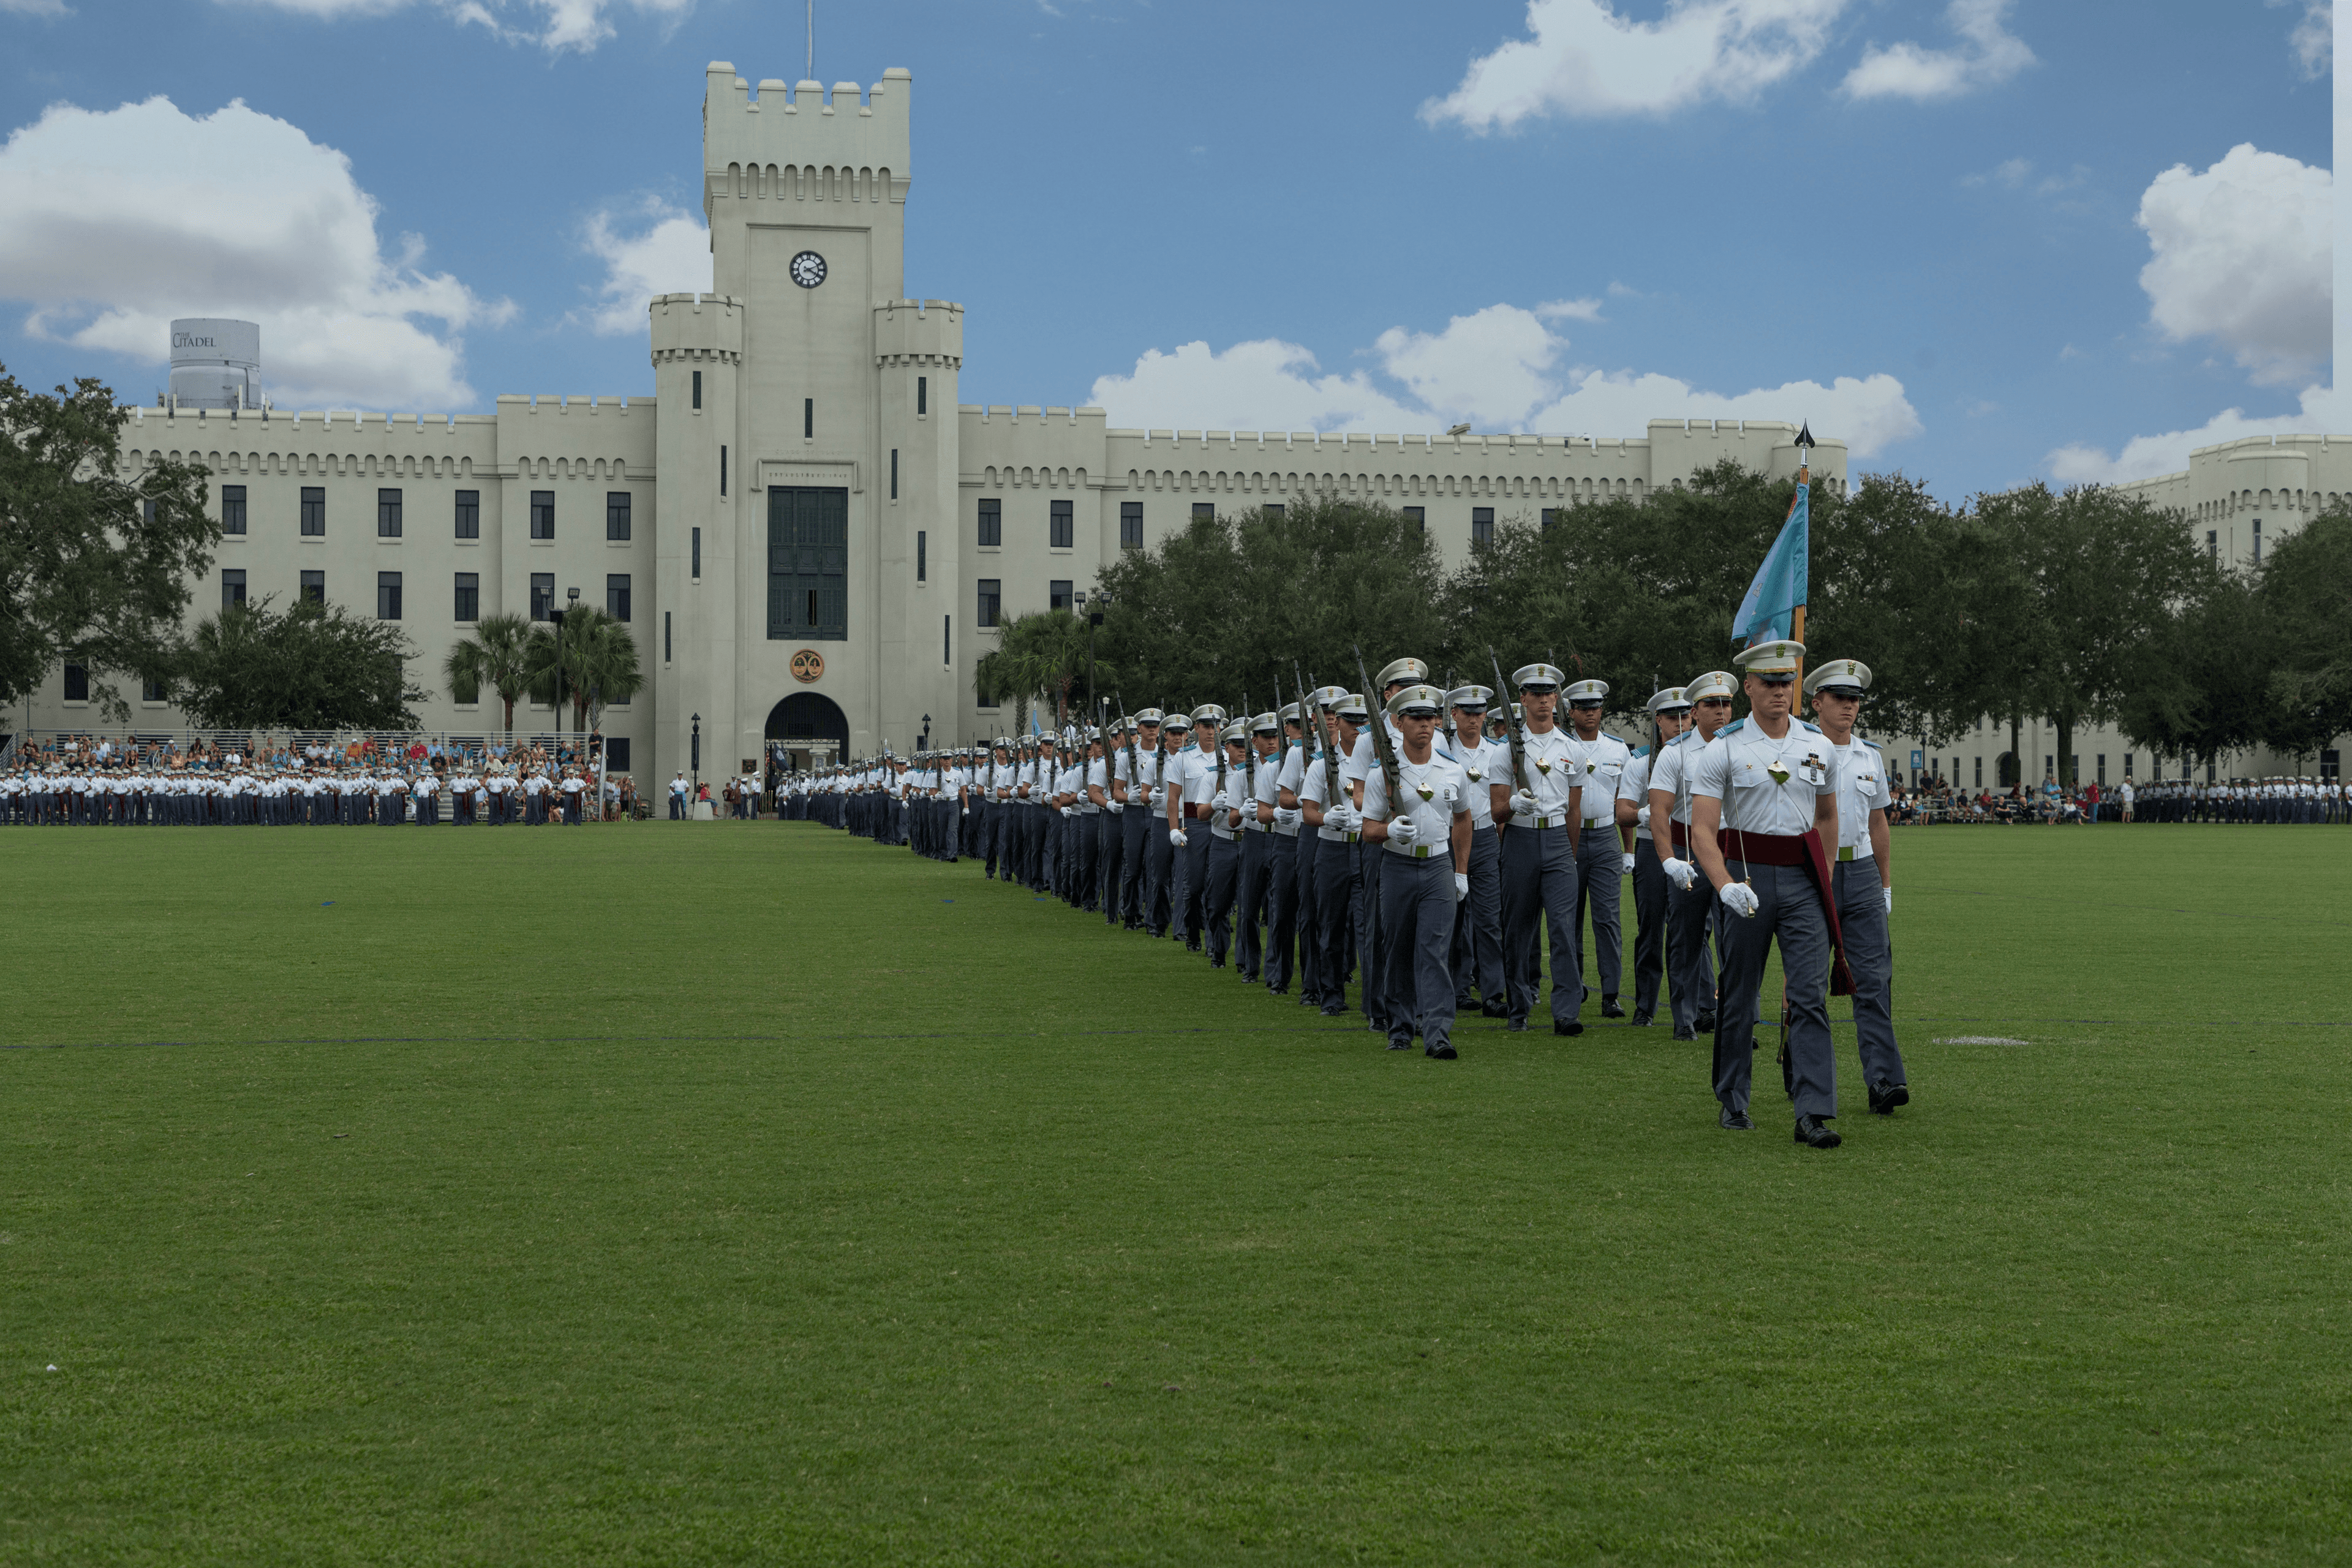 Cadets wearing white uniform marching in front of school building.